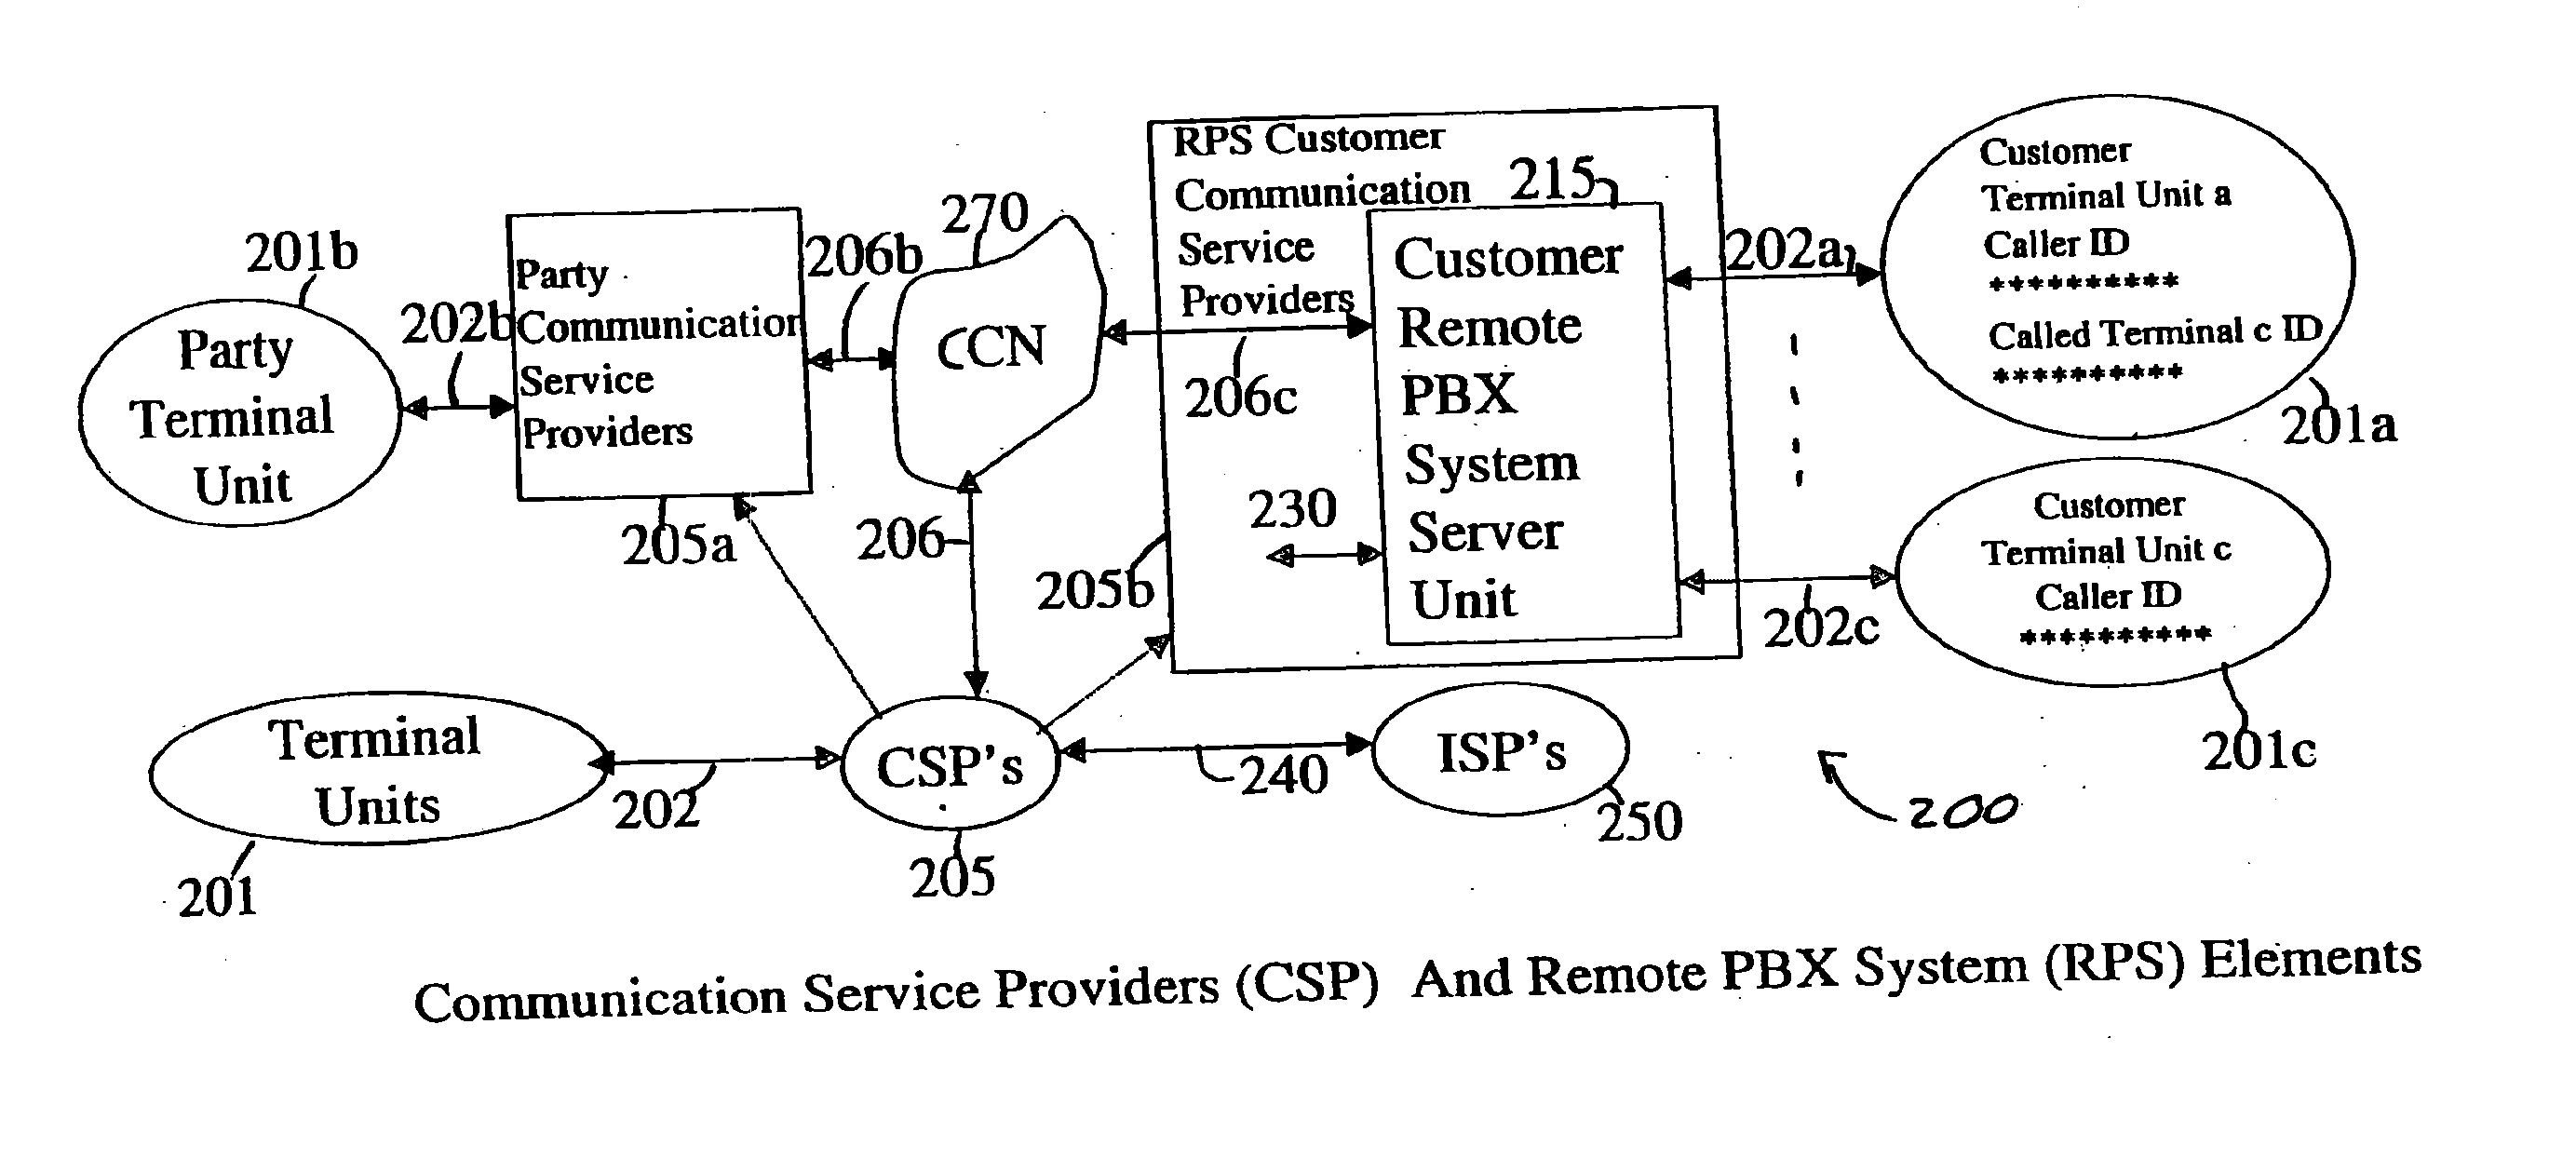 Remote PBX System and Advance Communication Terminals